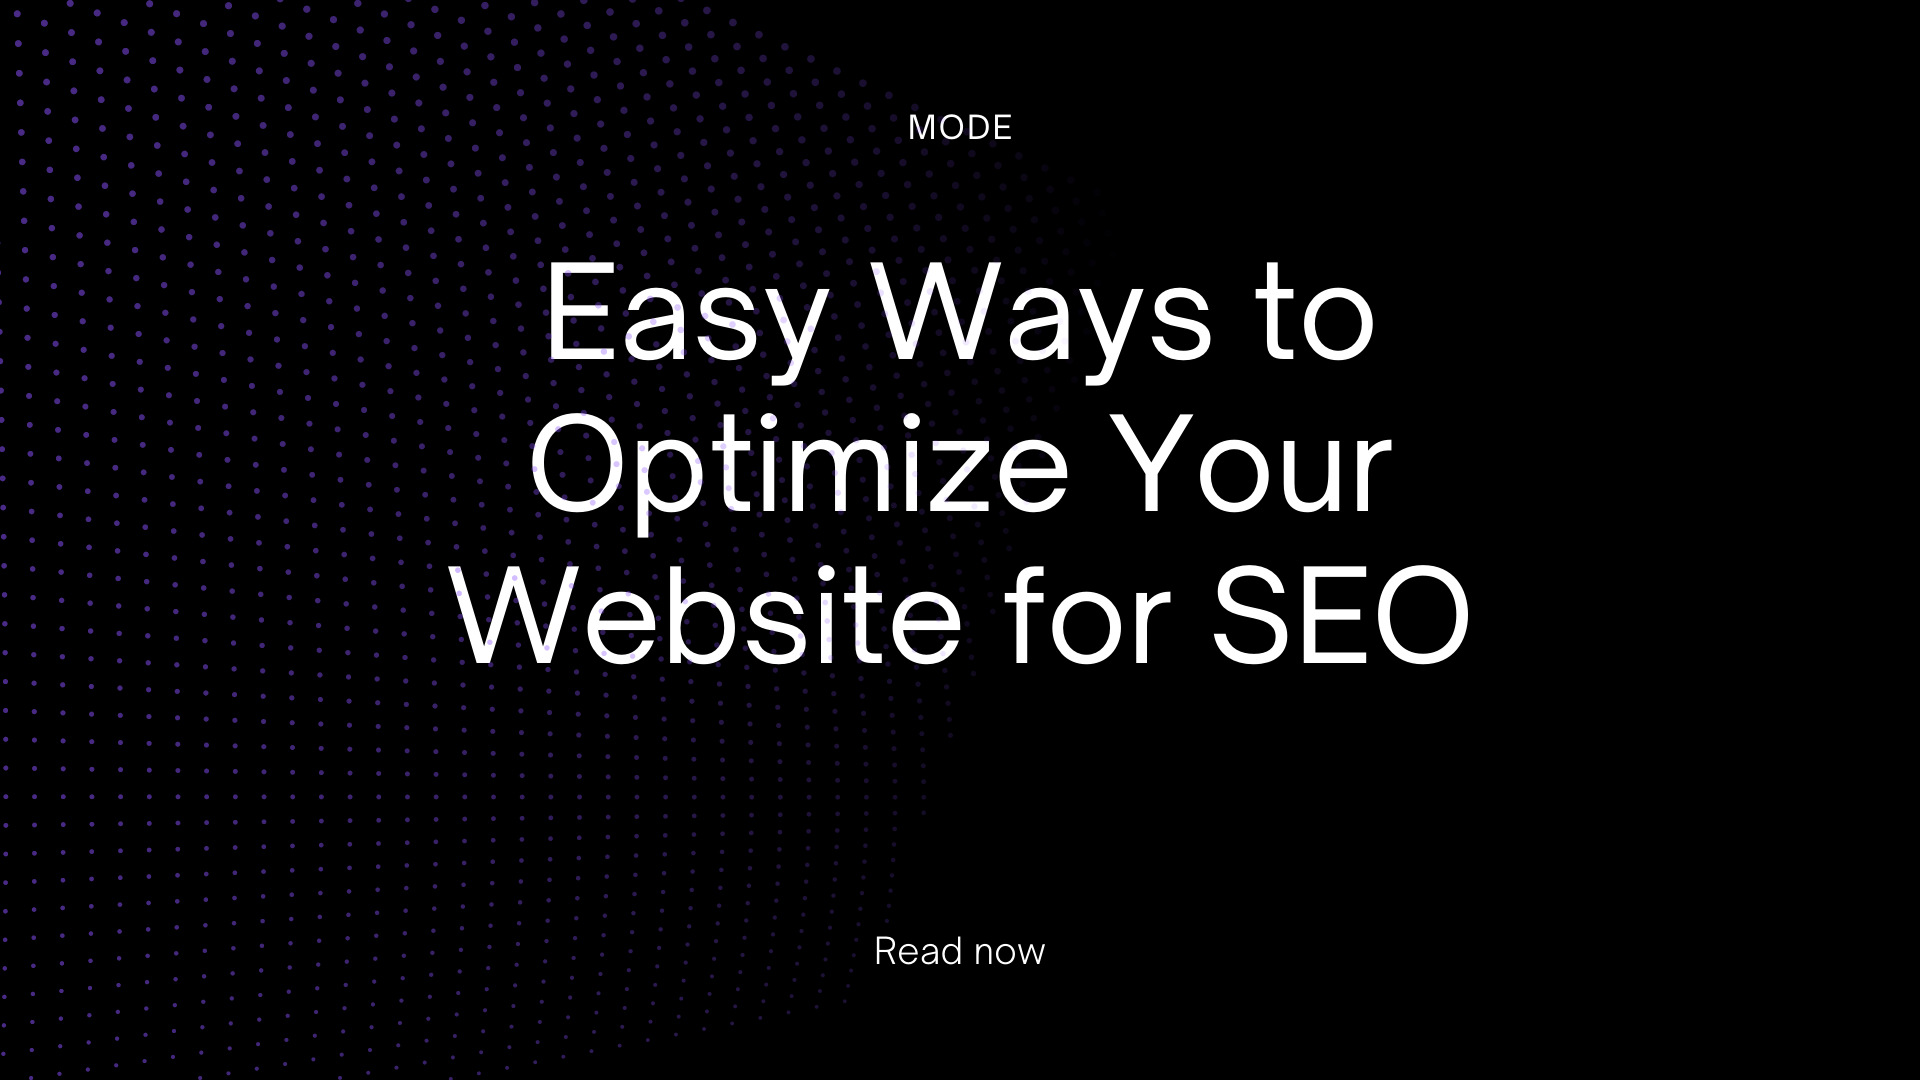 Easy Ways to Optimize Your Website for SEO